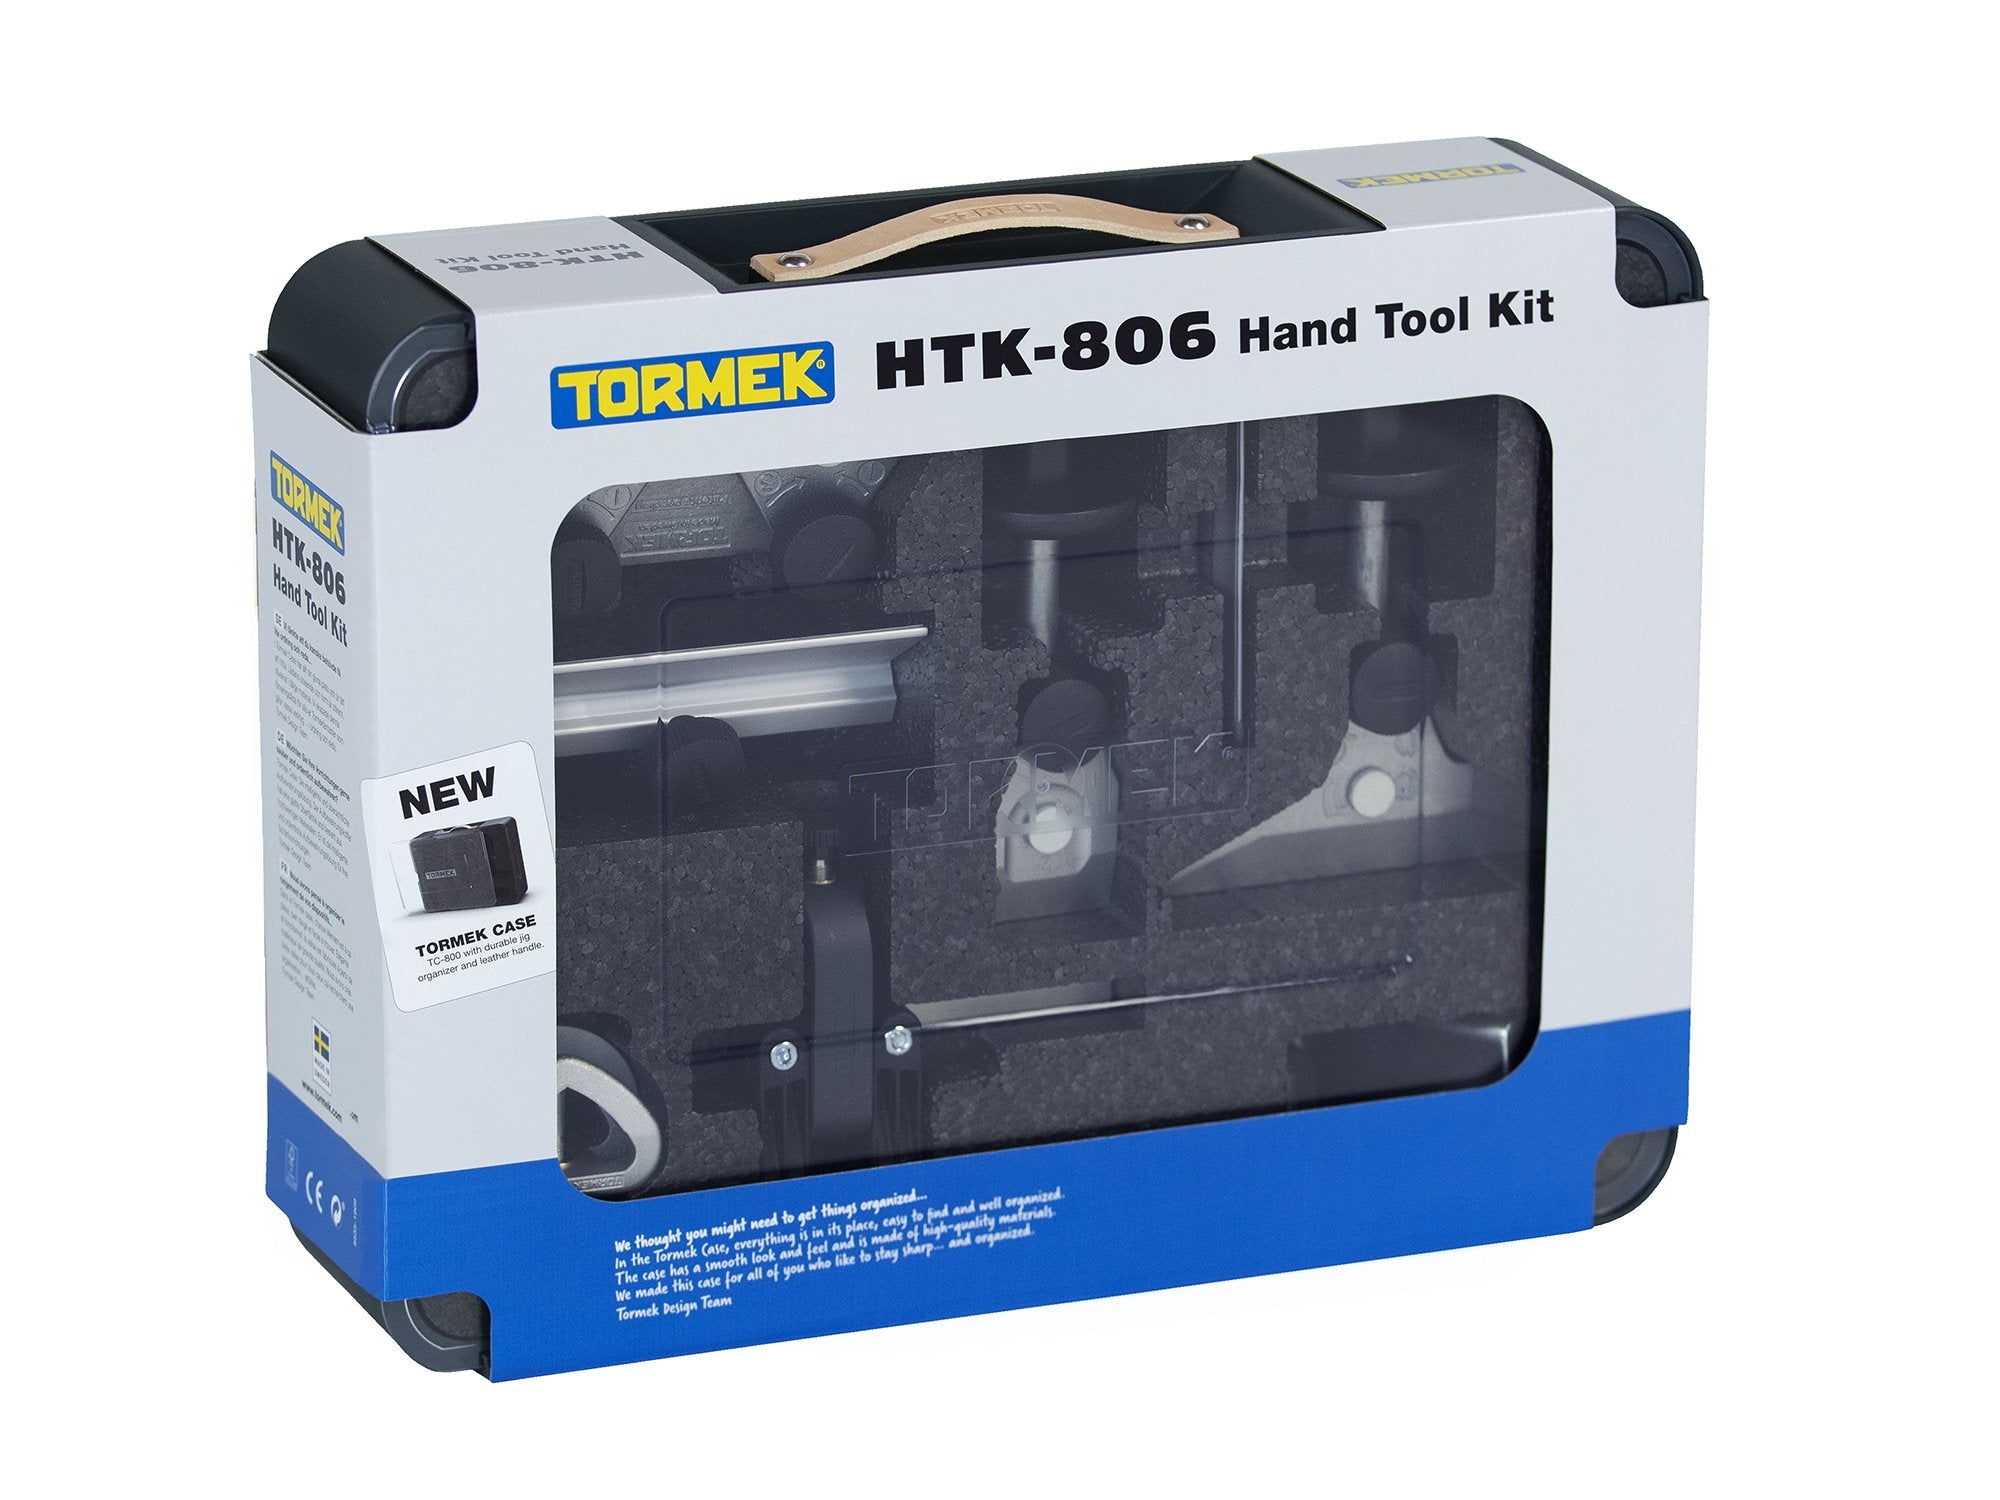 Front of HTK-806 in retail packaging.